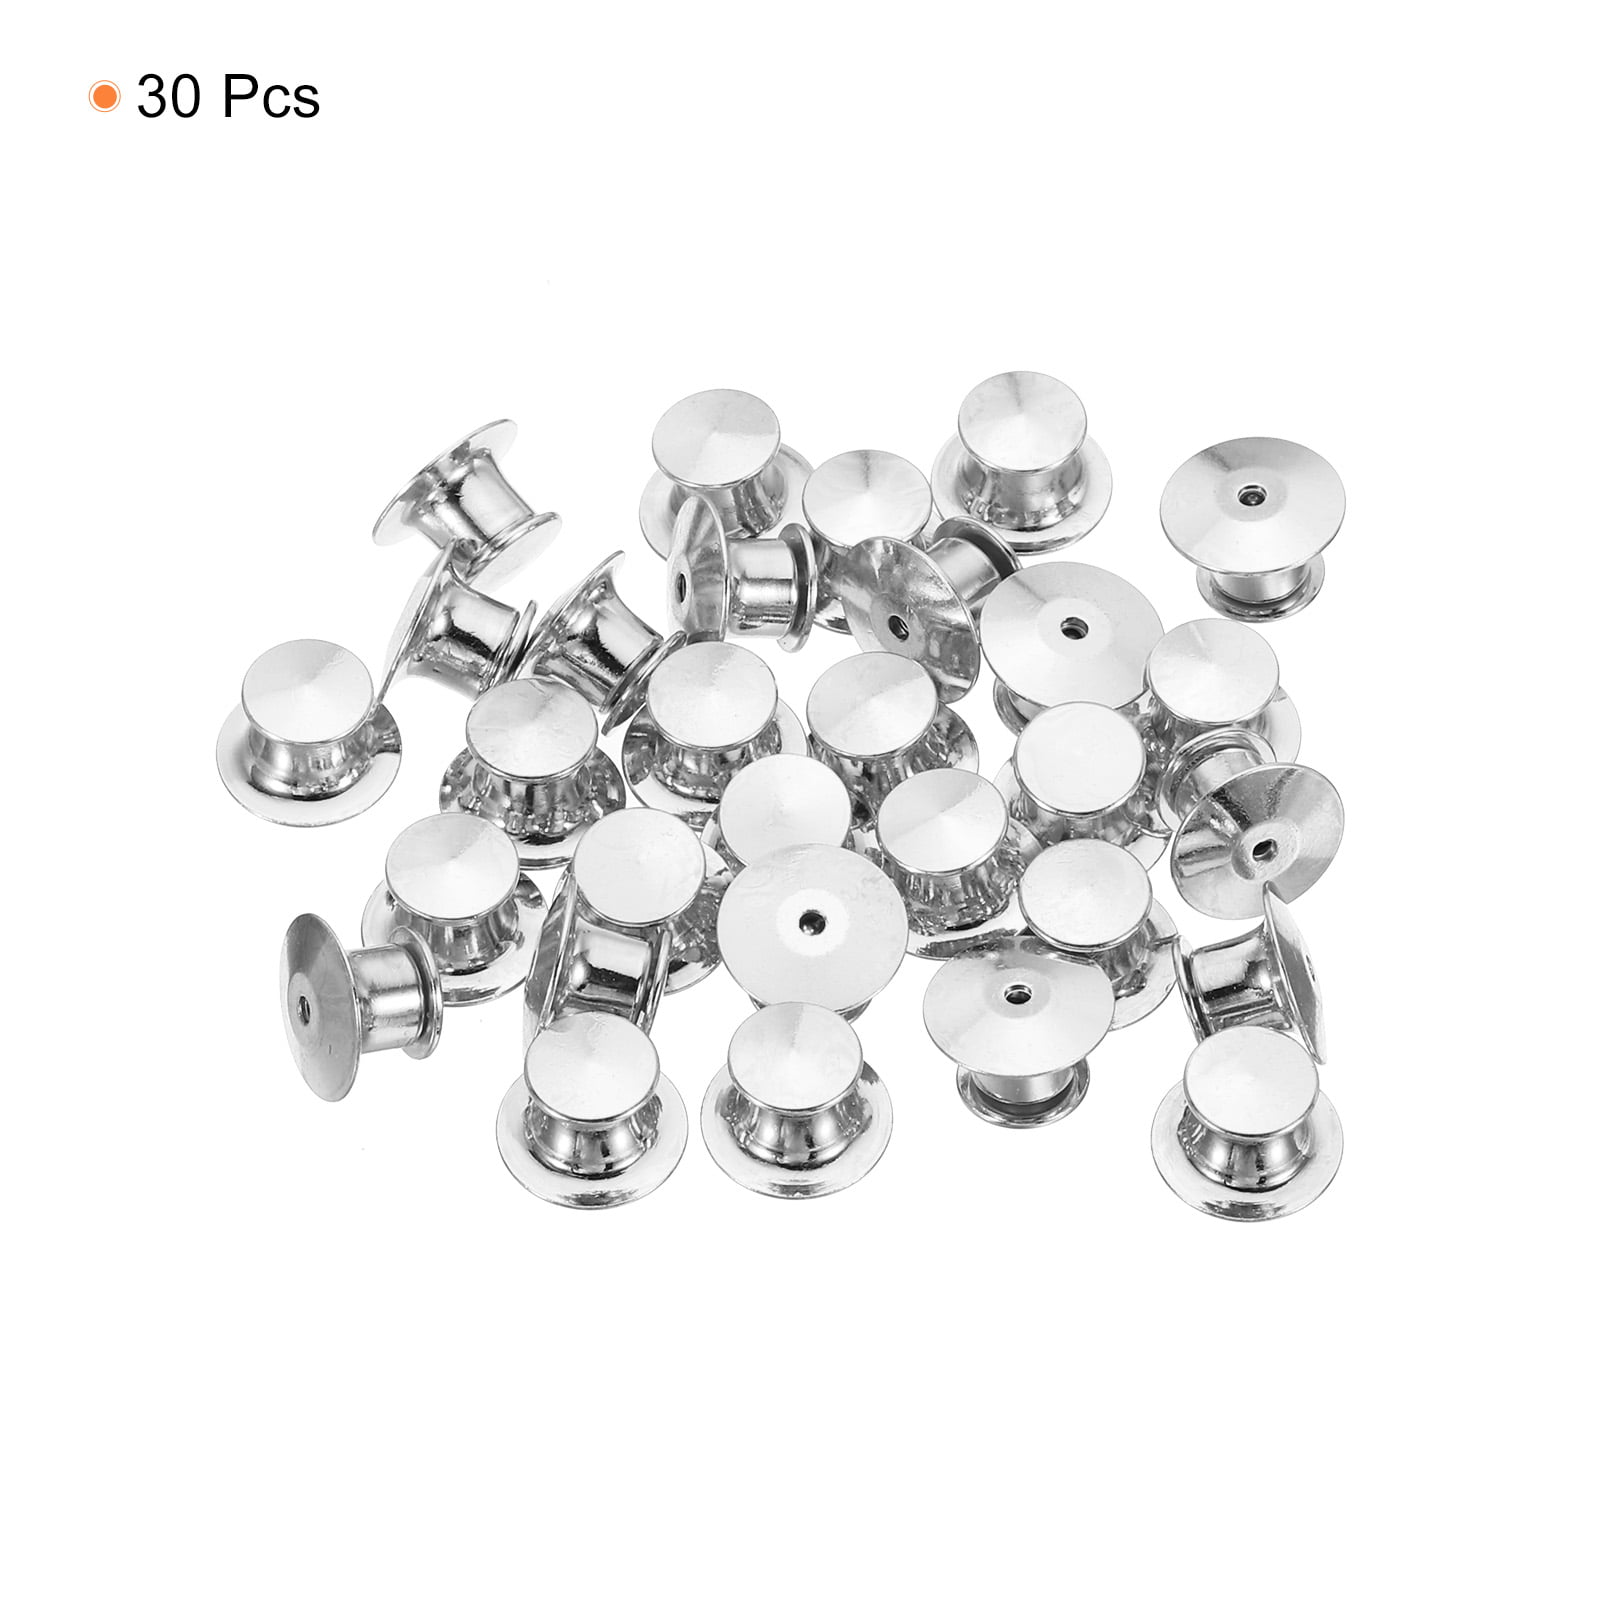 Uxcell Pin Backs Metal Lapel Pin Backing Enamel Pin Brooch Holder  Decorative Accessories Silver Tone 100 Pack 